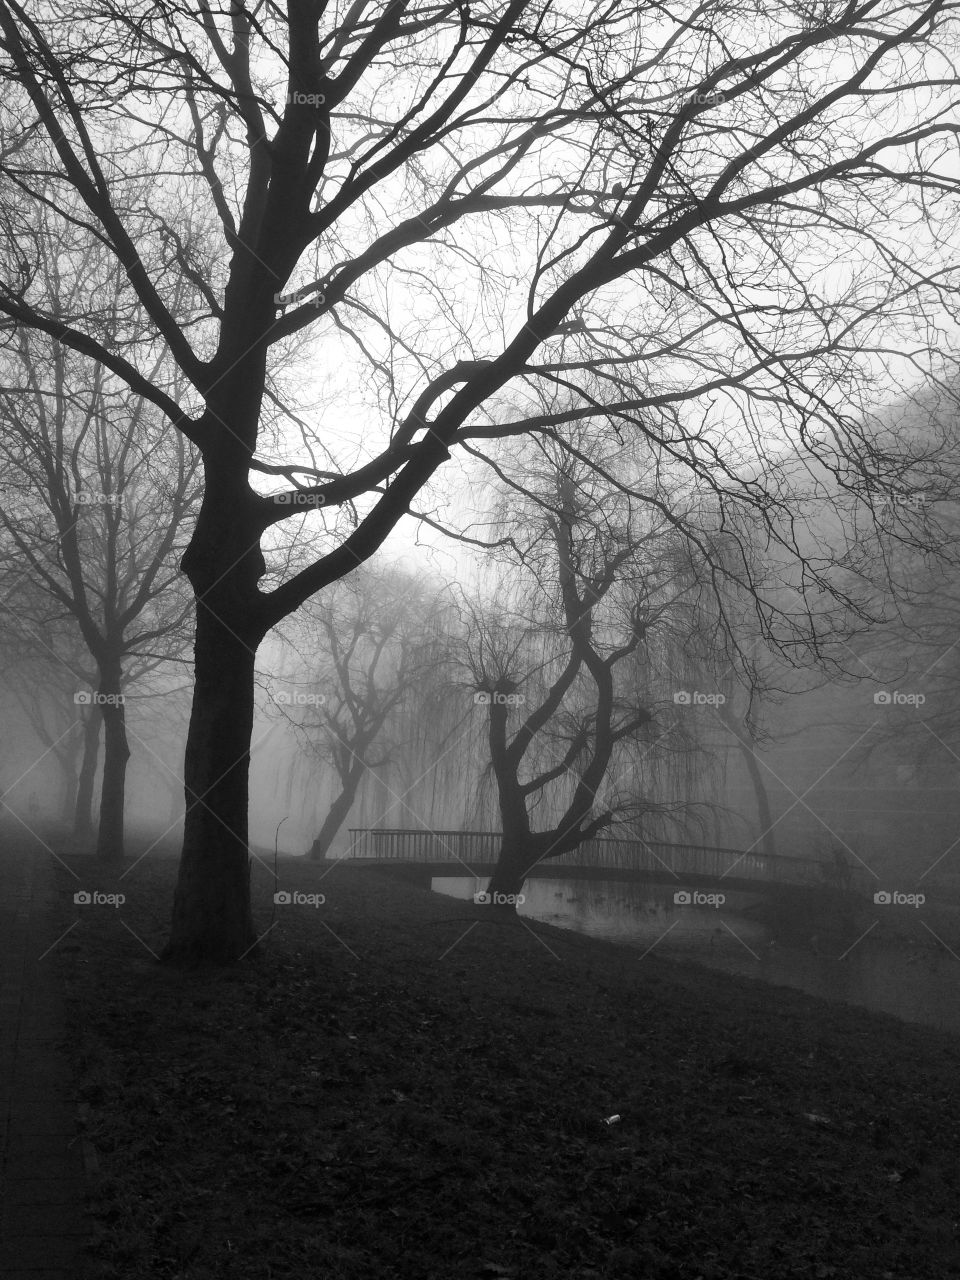 A very misty day. no color anymore.